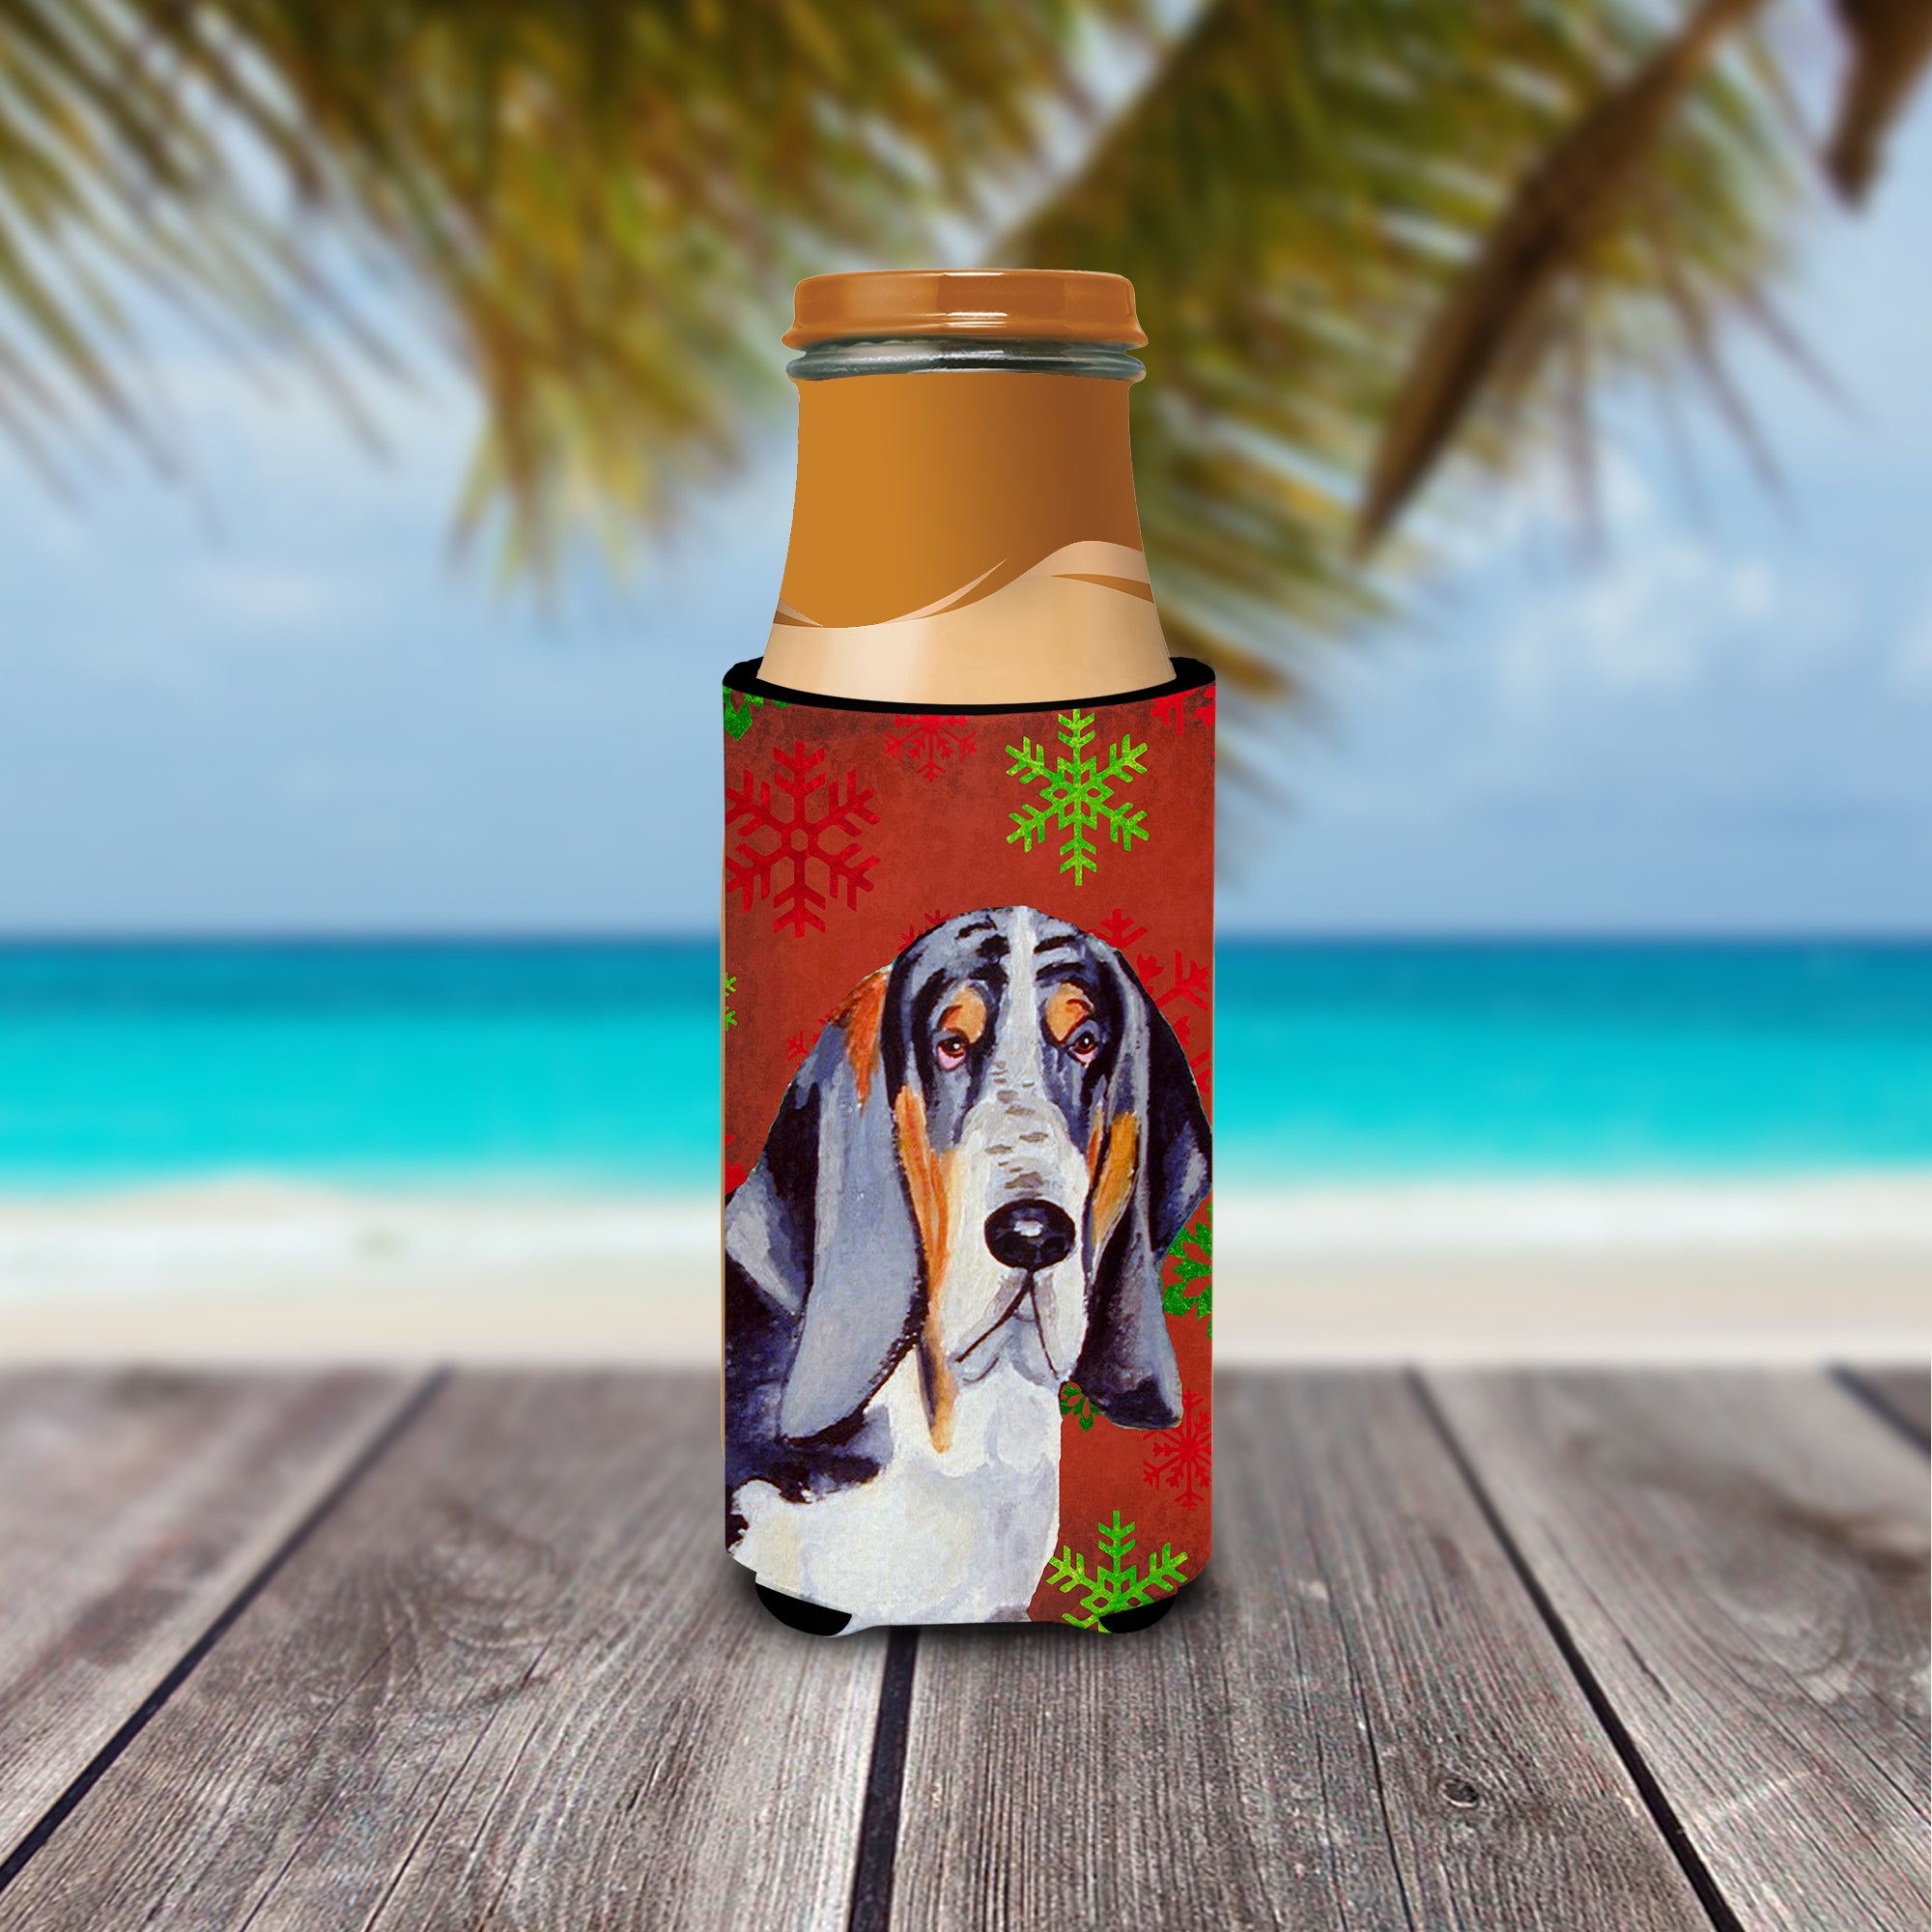 Basset Hound Red and Green Snowflakes Holiday Christmas Ultra Beverage Isolateurs pour canettes minces LH9327MUK